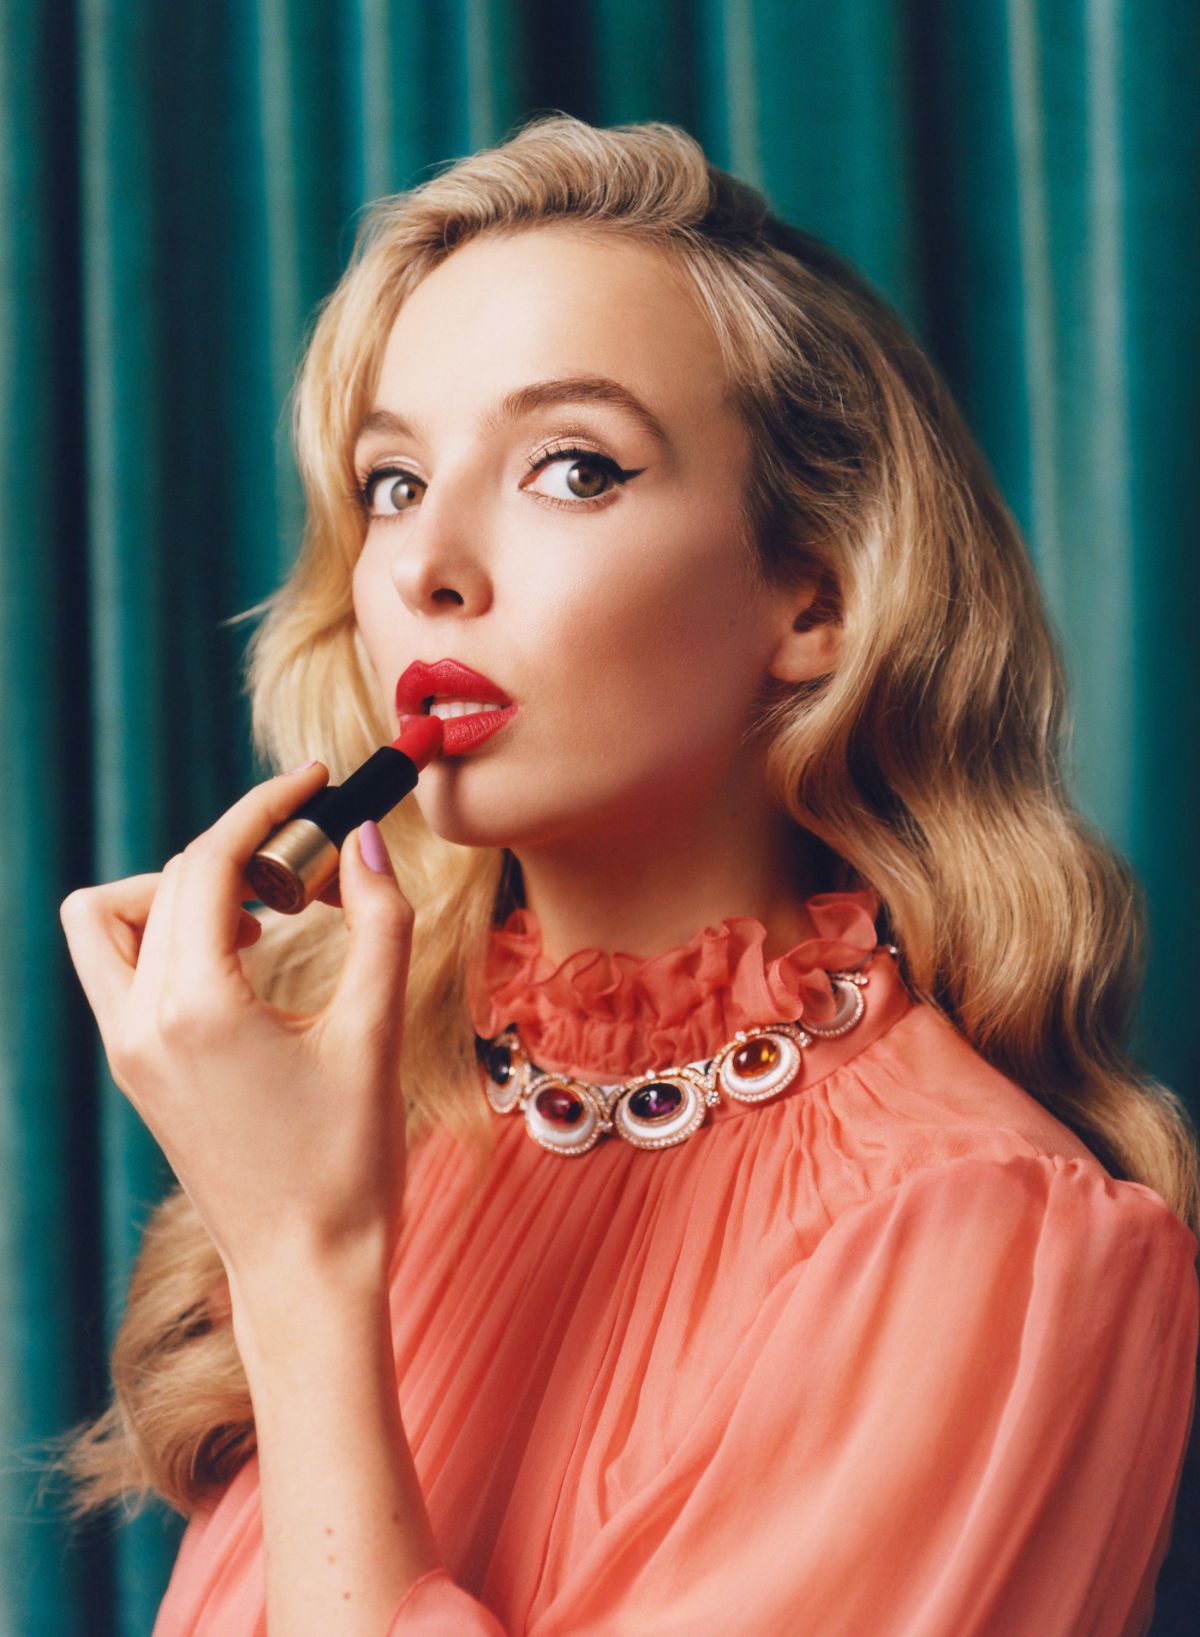 jodie-comer-for-instyle-magazine-january-2021-3.jpg